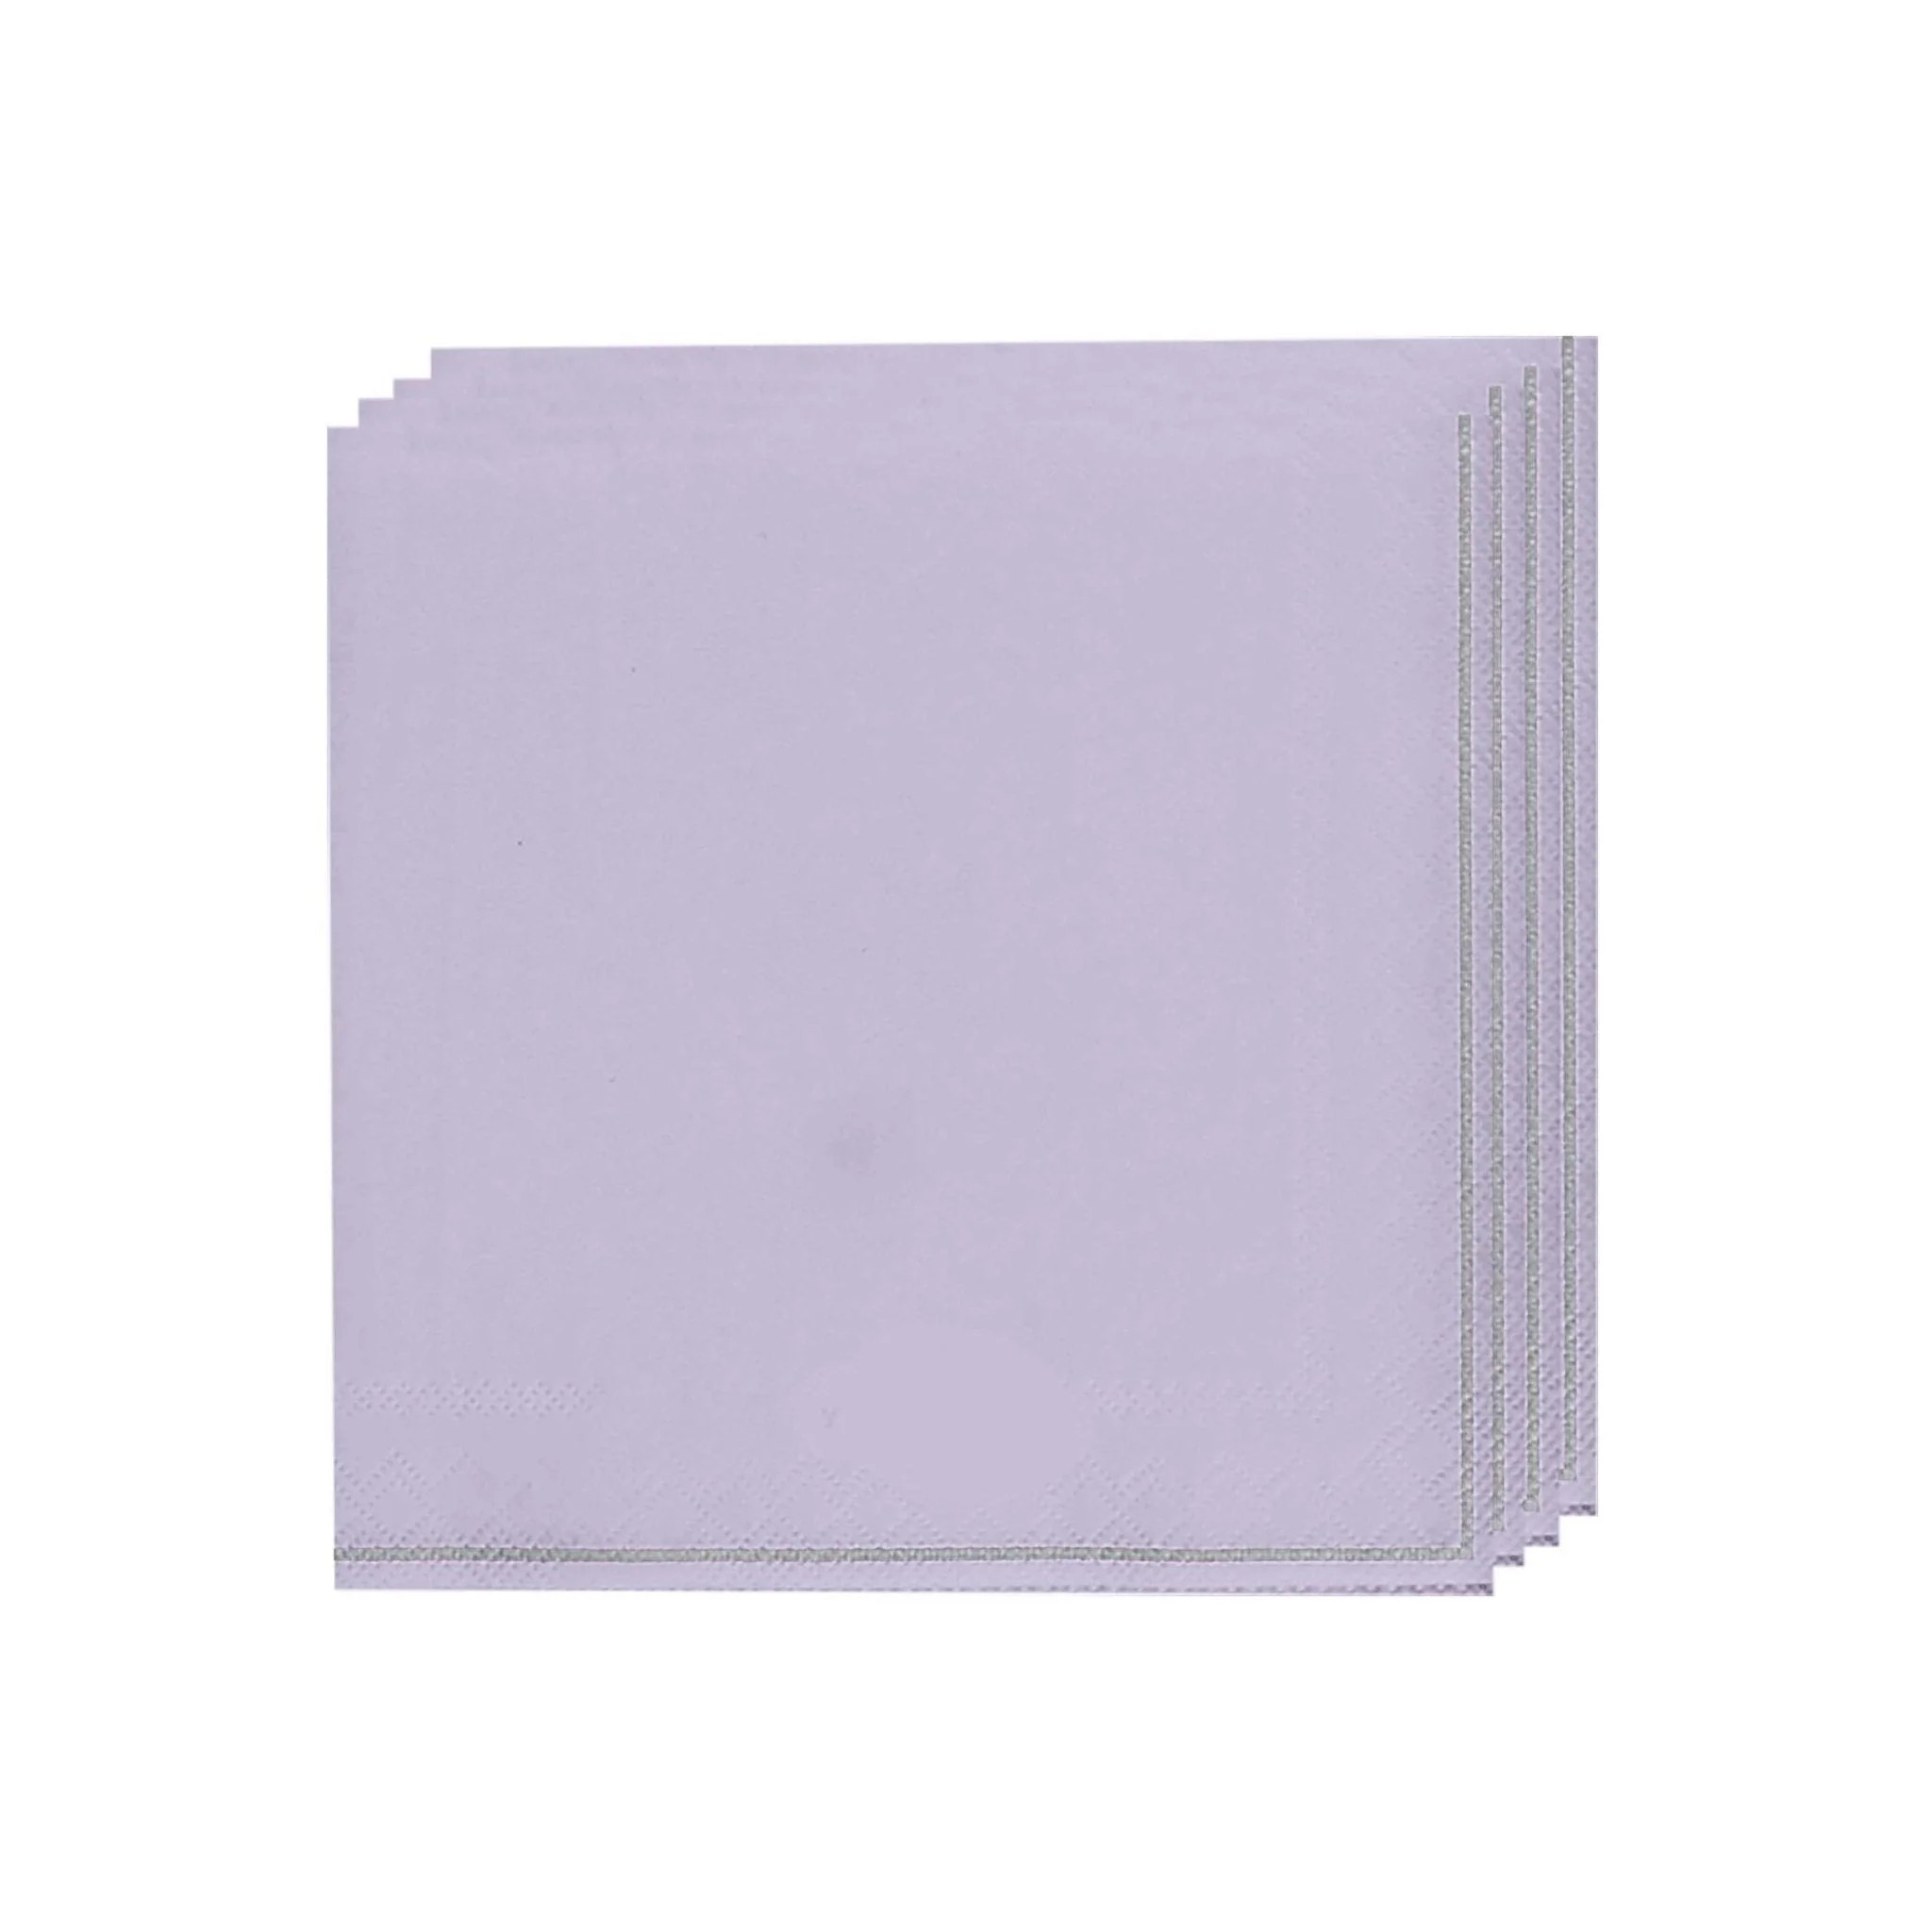 Luxe Party Lavender with Silver Stripe Lunch Napkins - 20 pcs